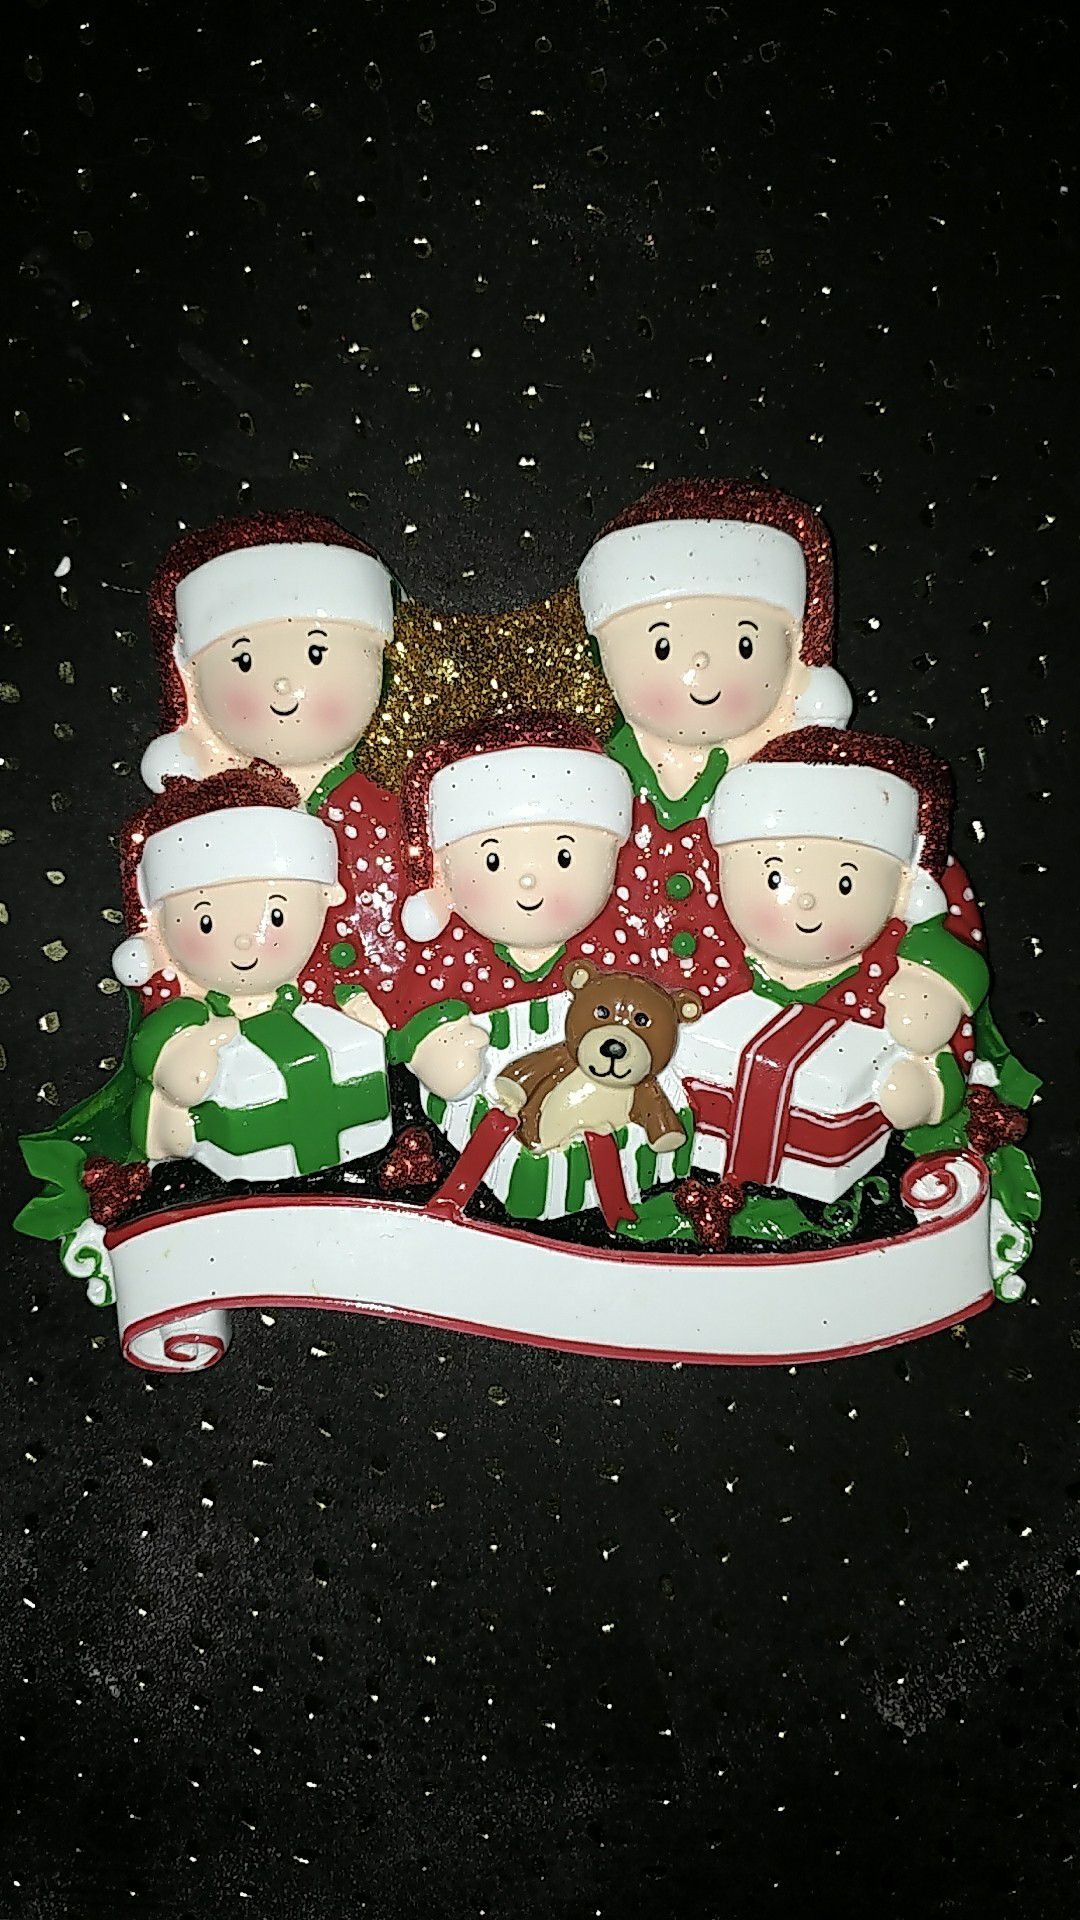 Family of 5 xmas ornament (personalized at no xtra cost)